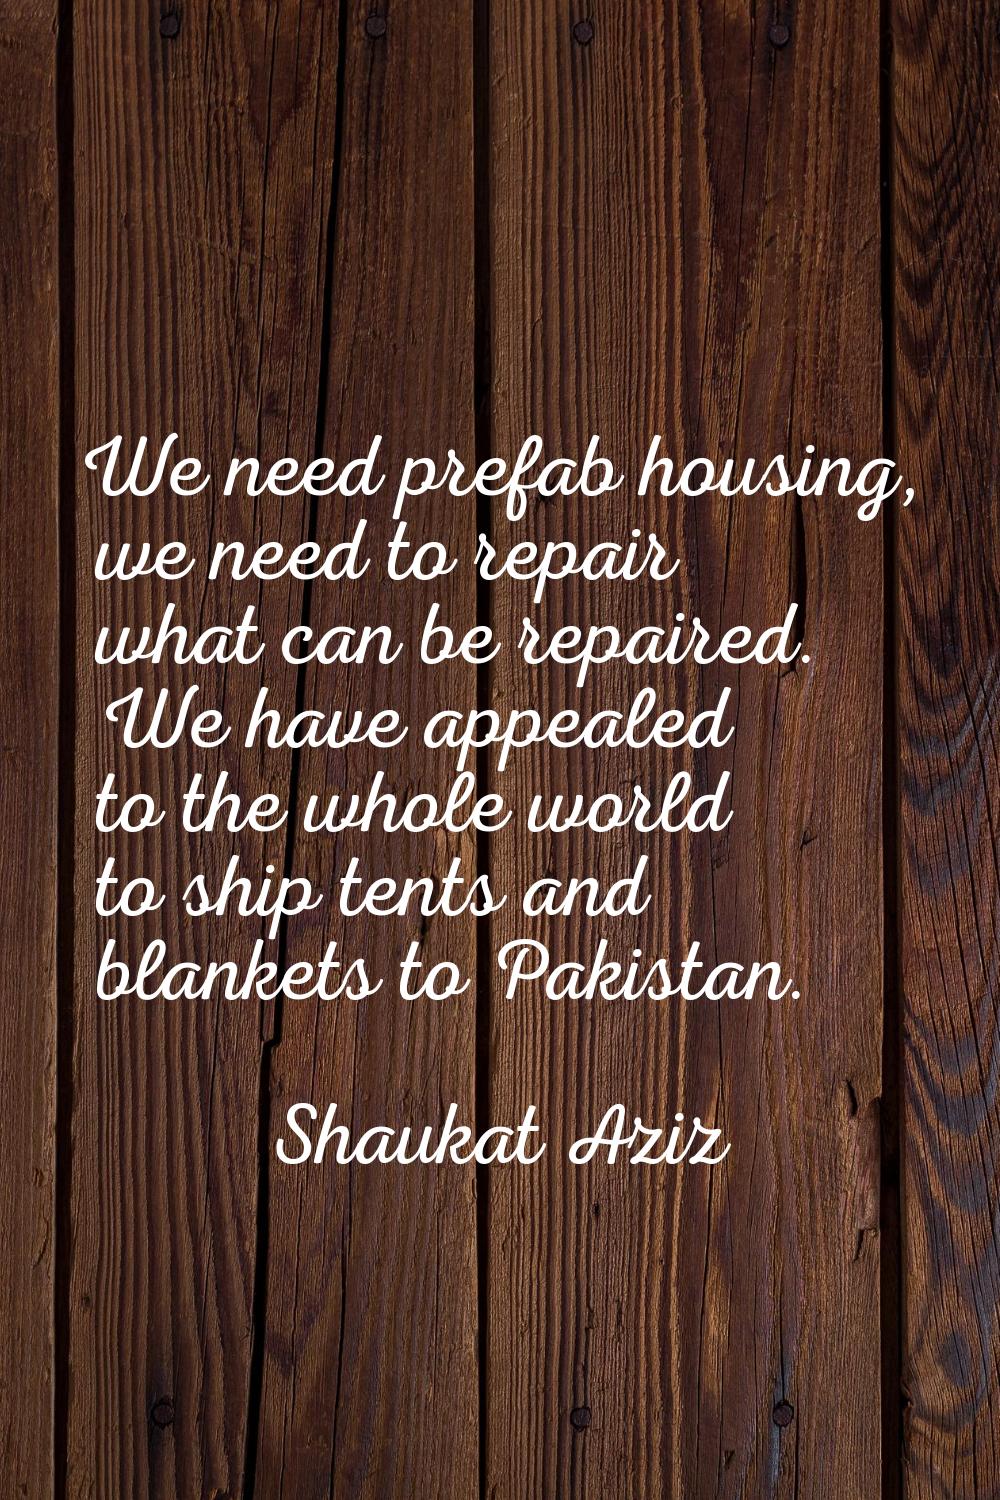 We need prefab housing, we need to repair what can be repaired. We have appealed to the whole world